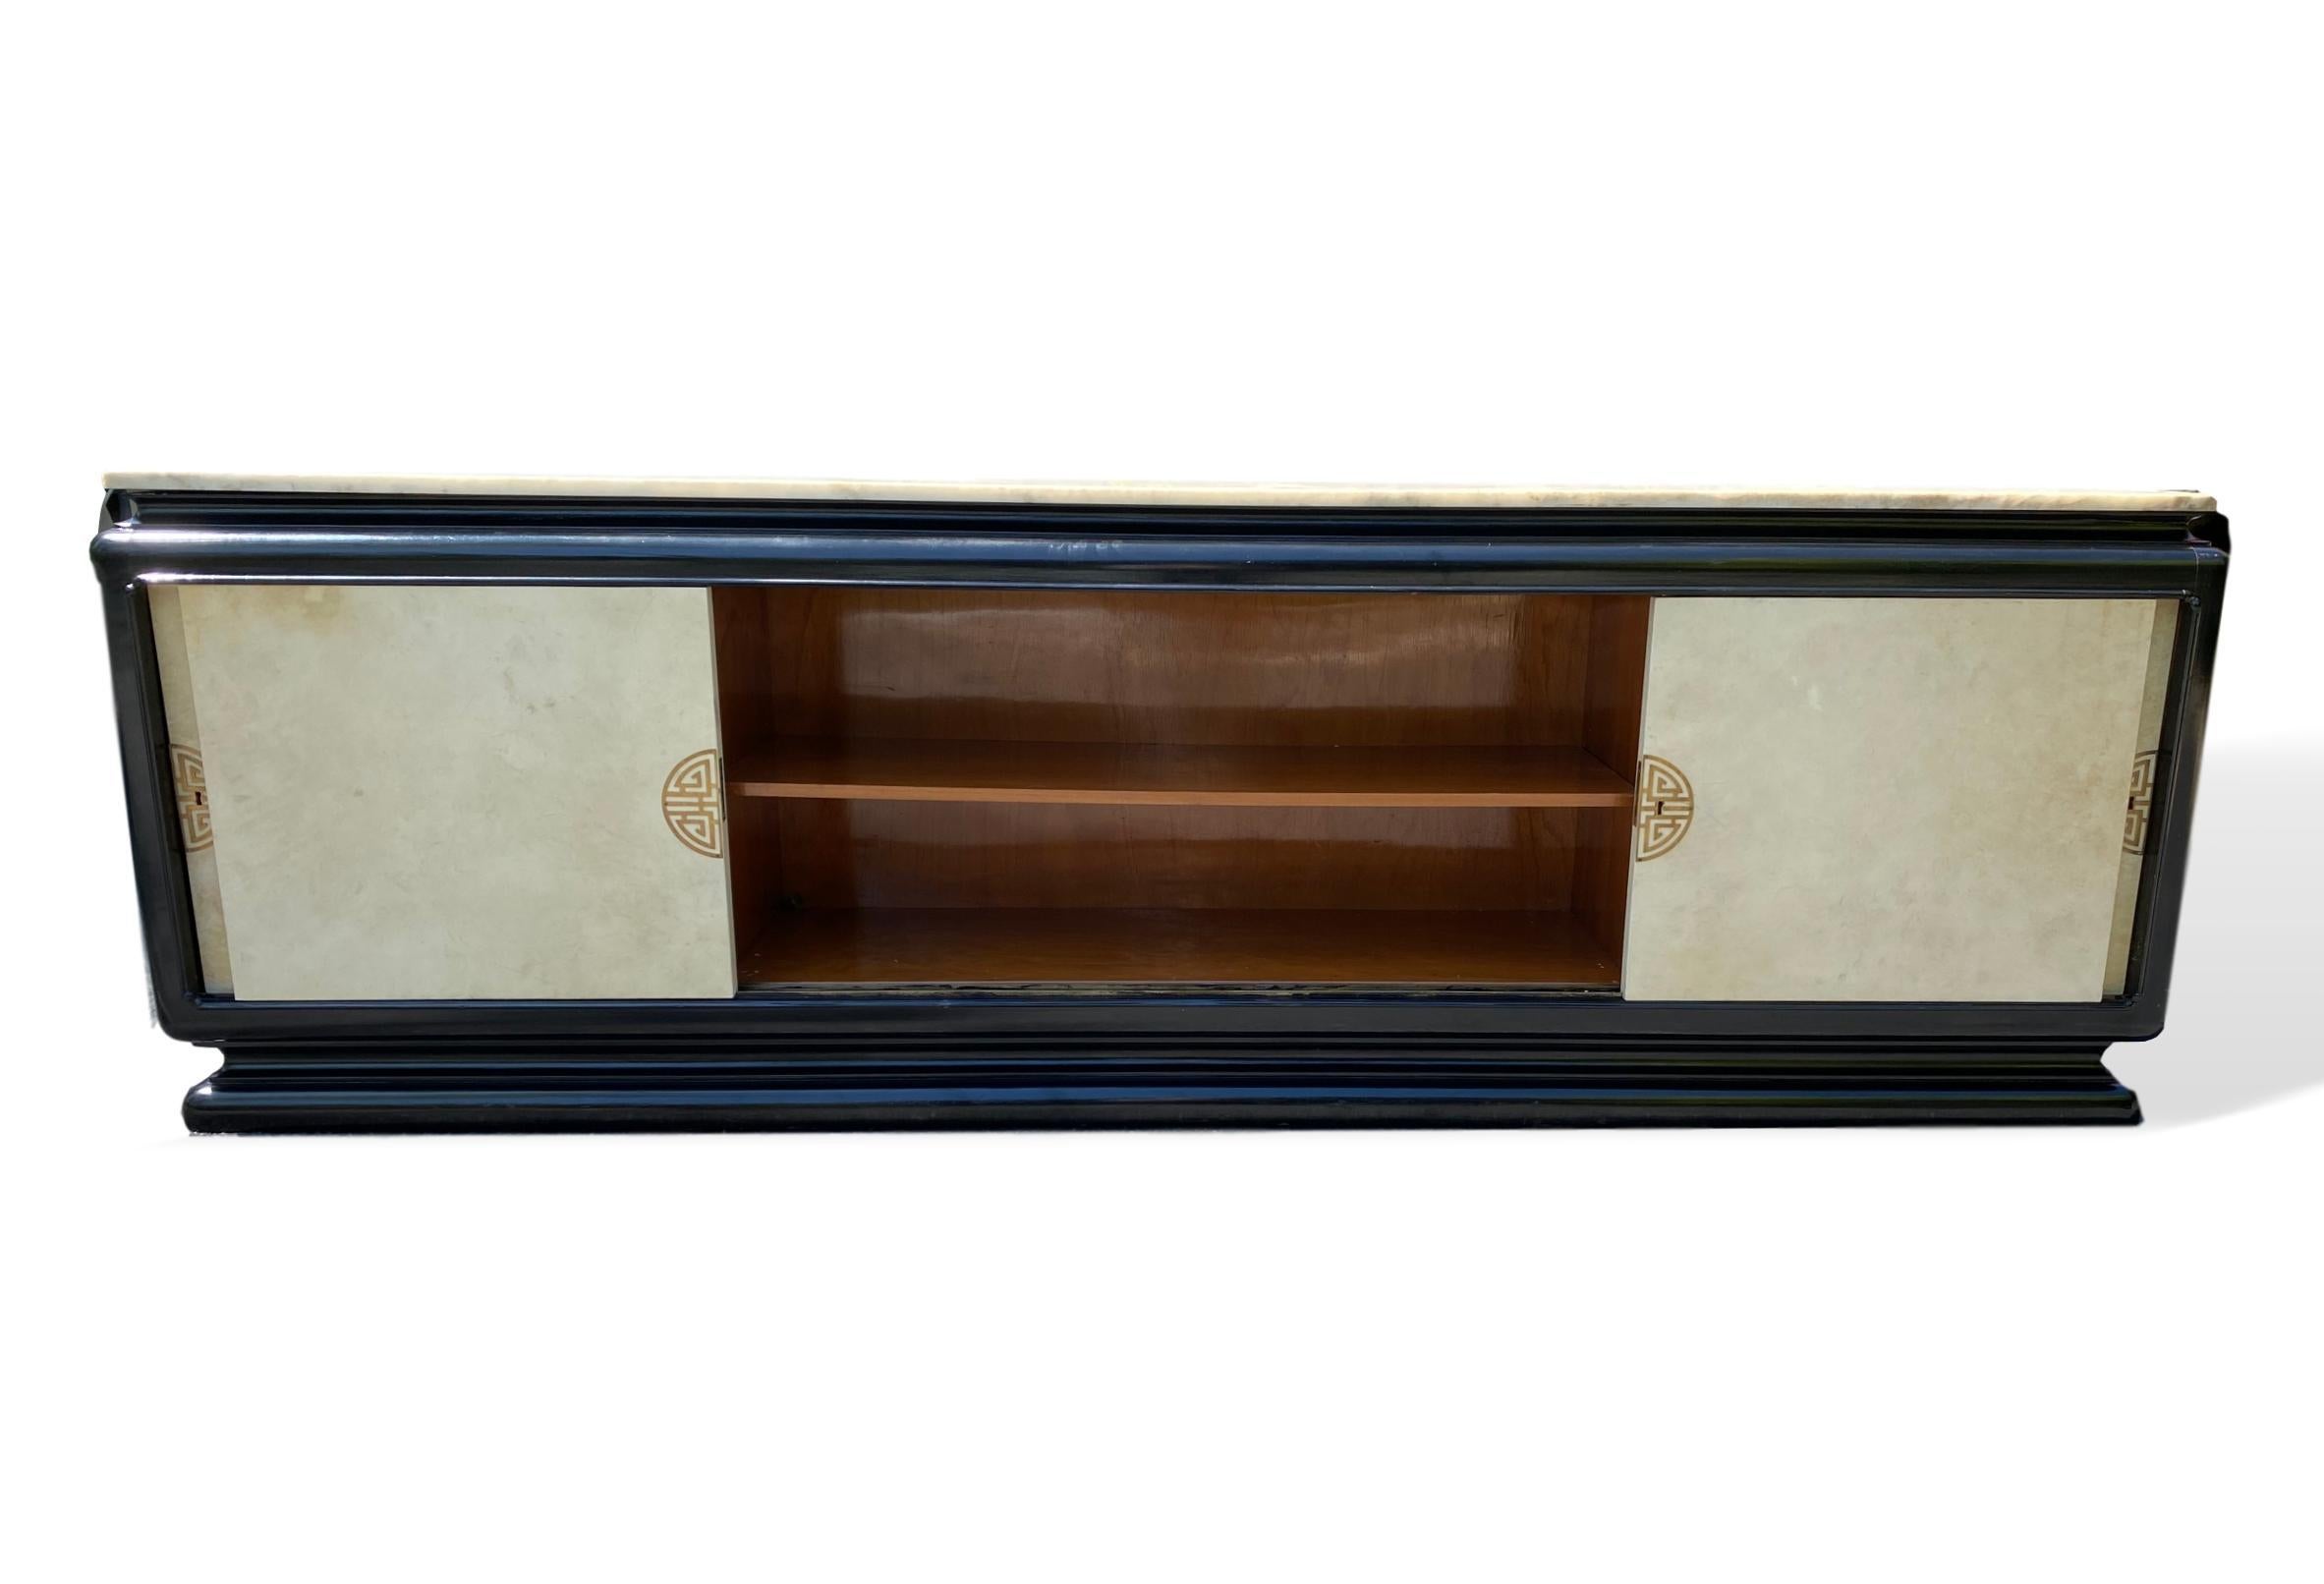 20th Century Mid-Century Modern Hollywood Regency Art Deco Black Lacquer Parchment Credenza